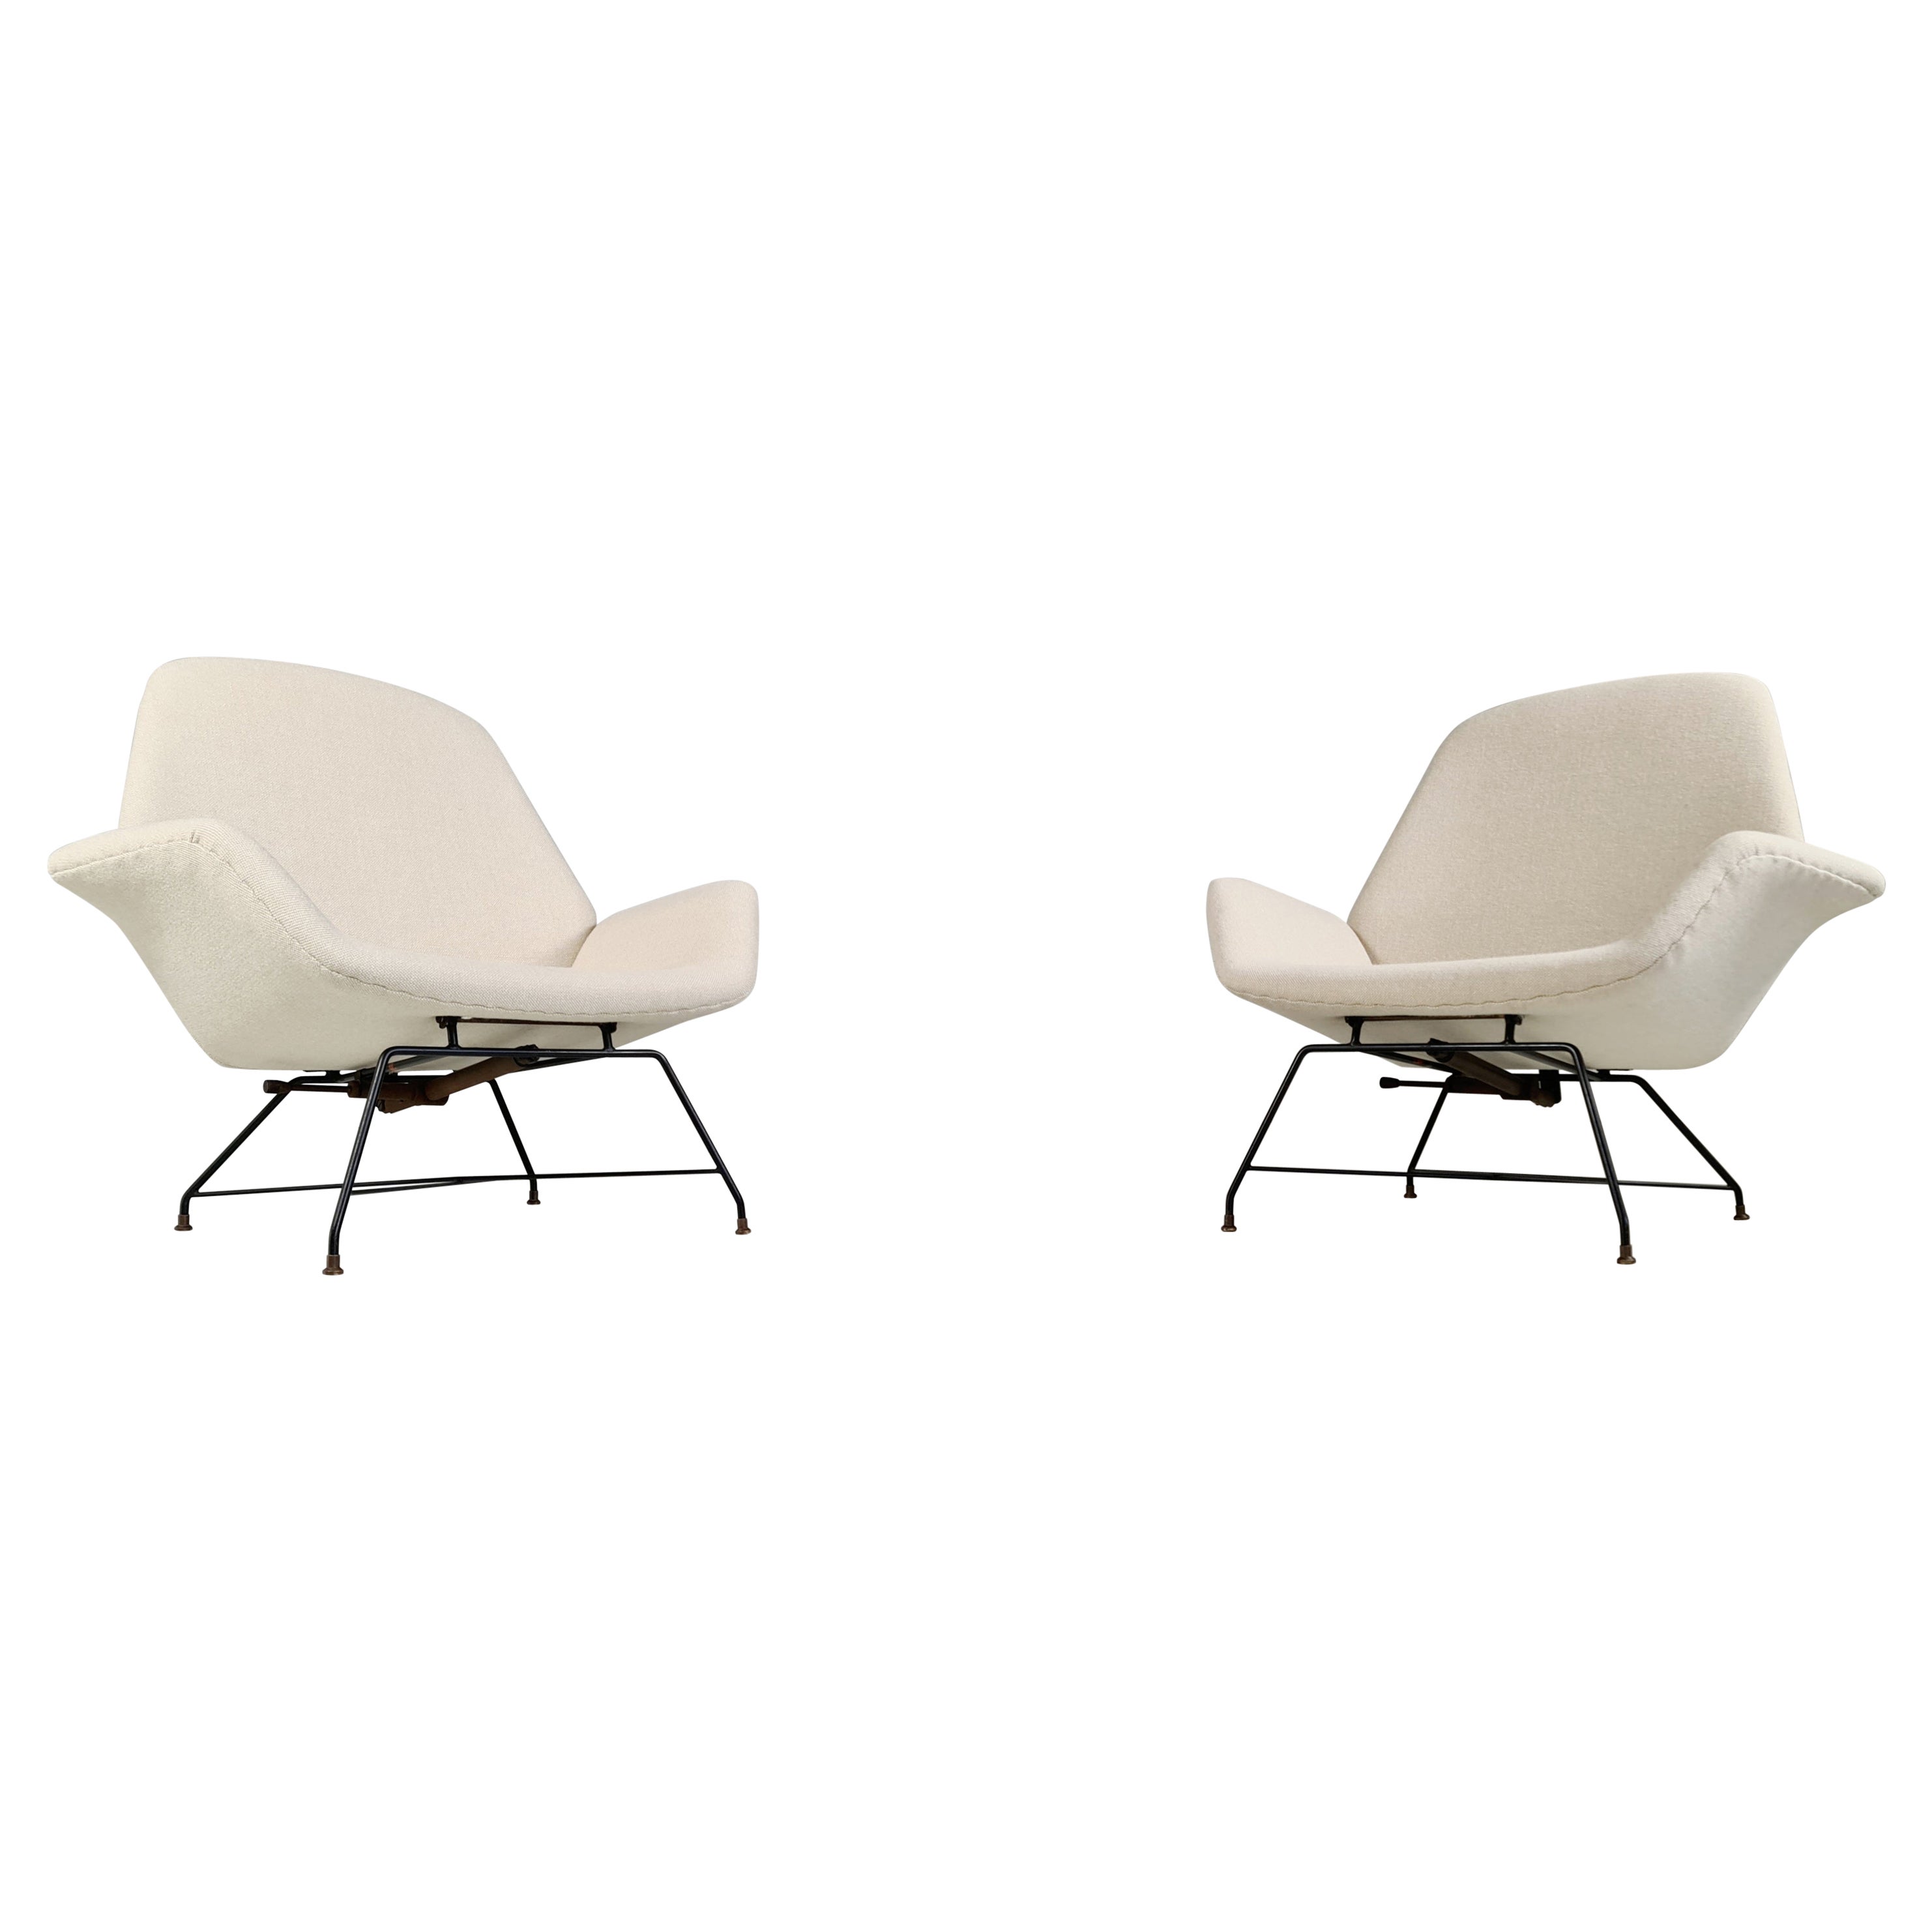 ‘Lotus’ Lounge Chairs in cream wool fabric by Augusto Bozzi for Saporiti, 1960s For Sale